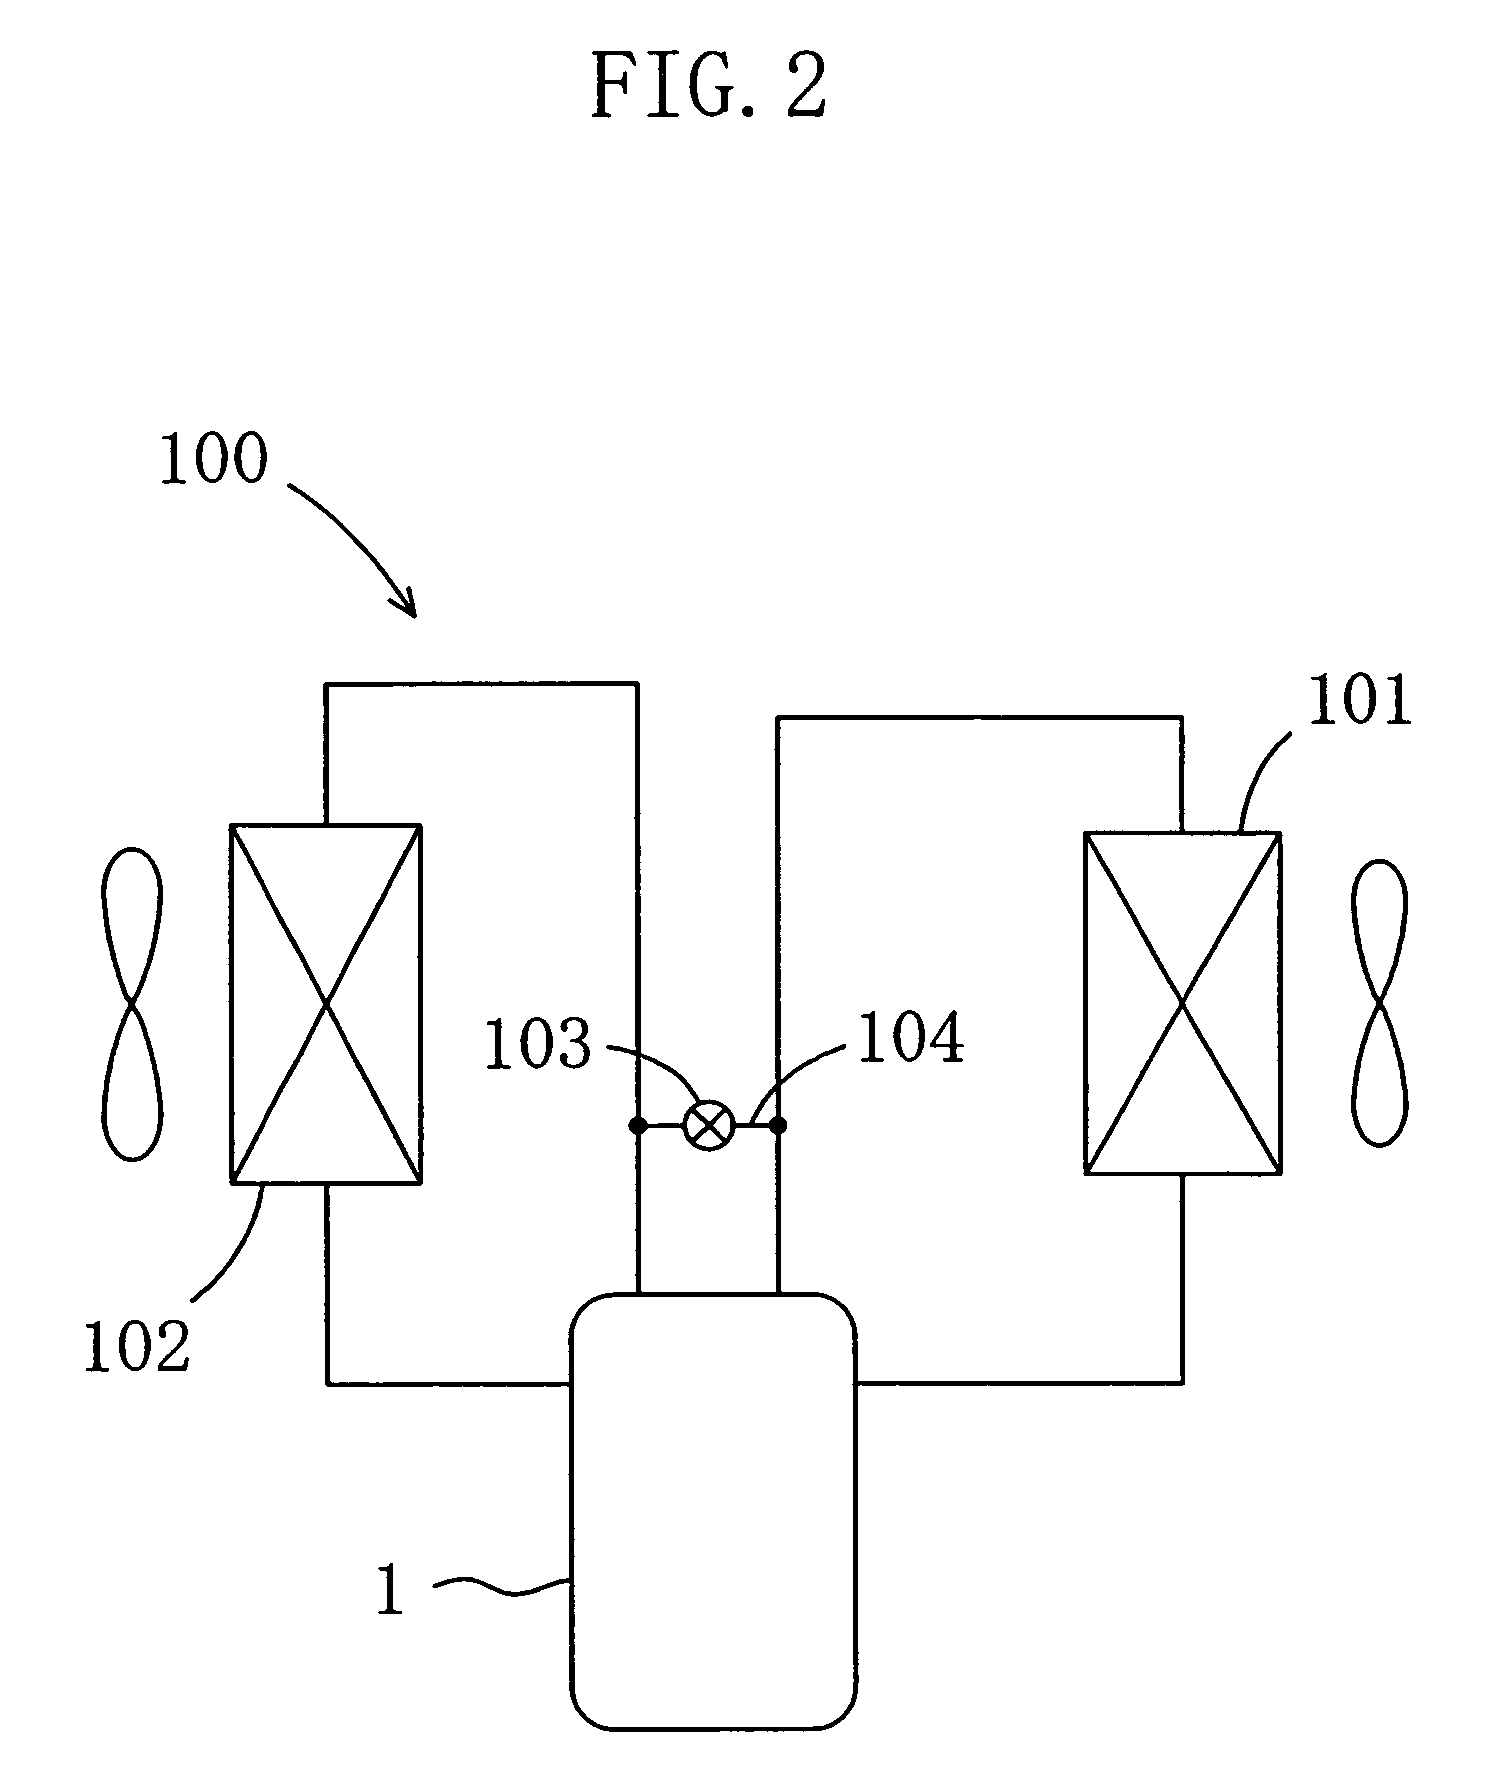 Rotary fluid device performing compression and expansion of fluid within a common cylinder